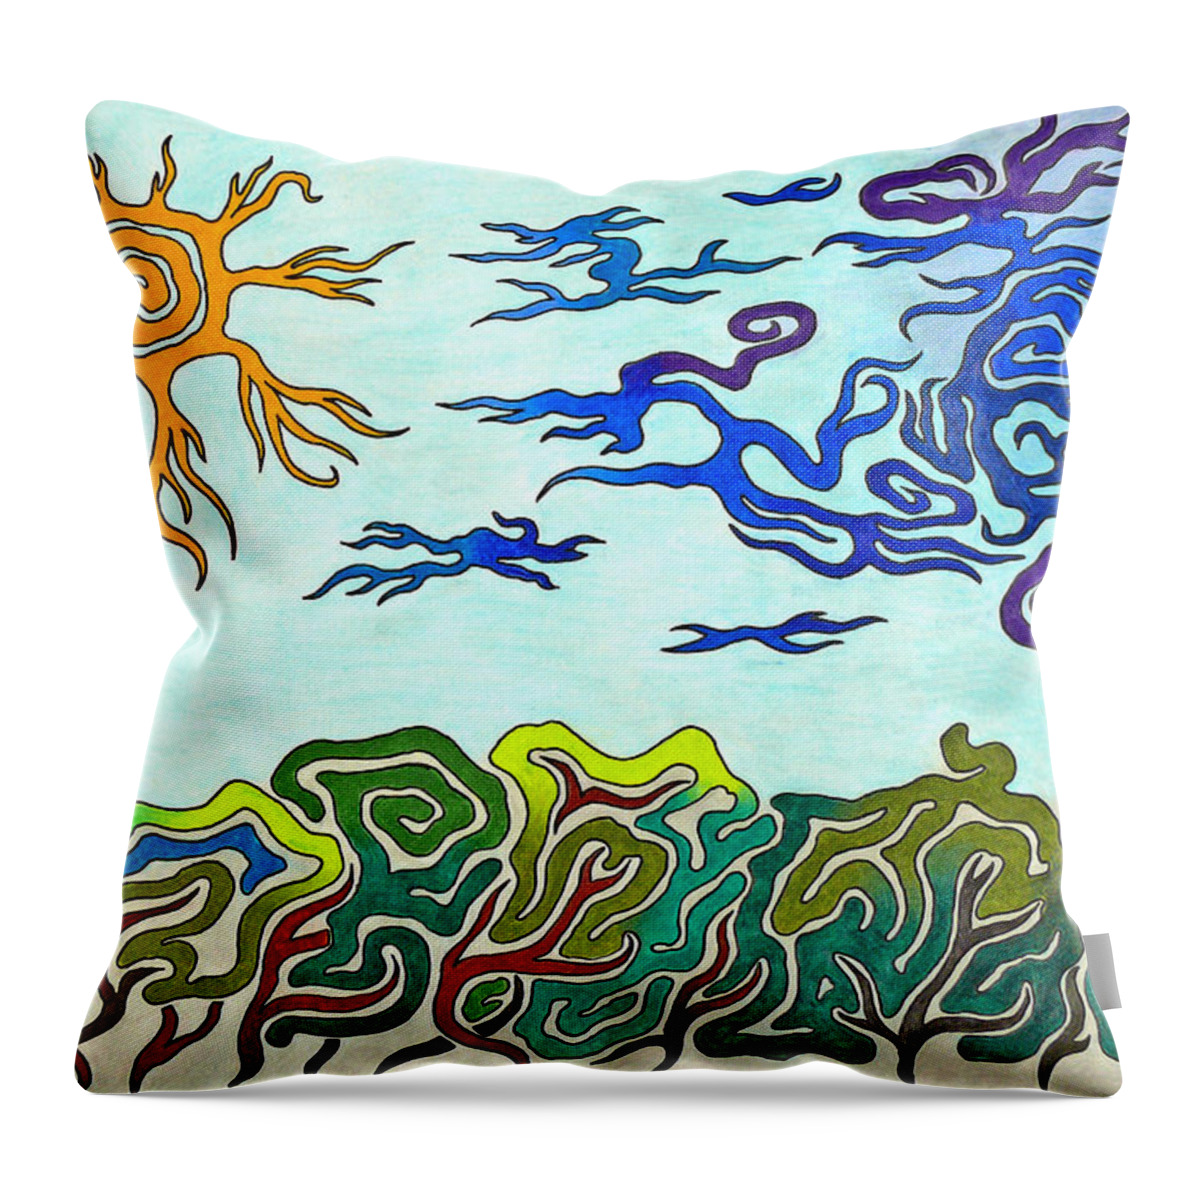 Thunderstorm Throw Pillow featuring the drawing Sunshine After Thunderstorm by Andreas Berthold